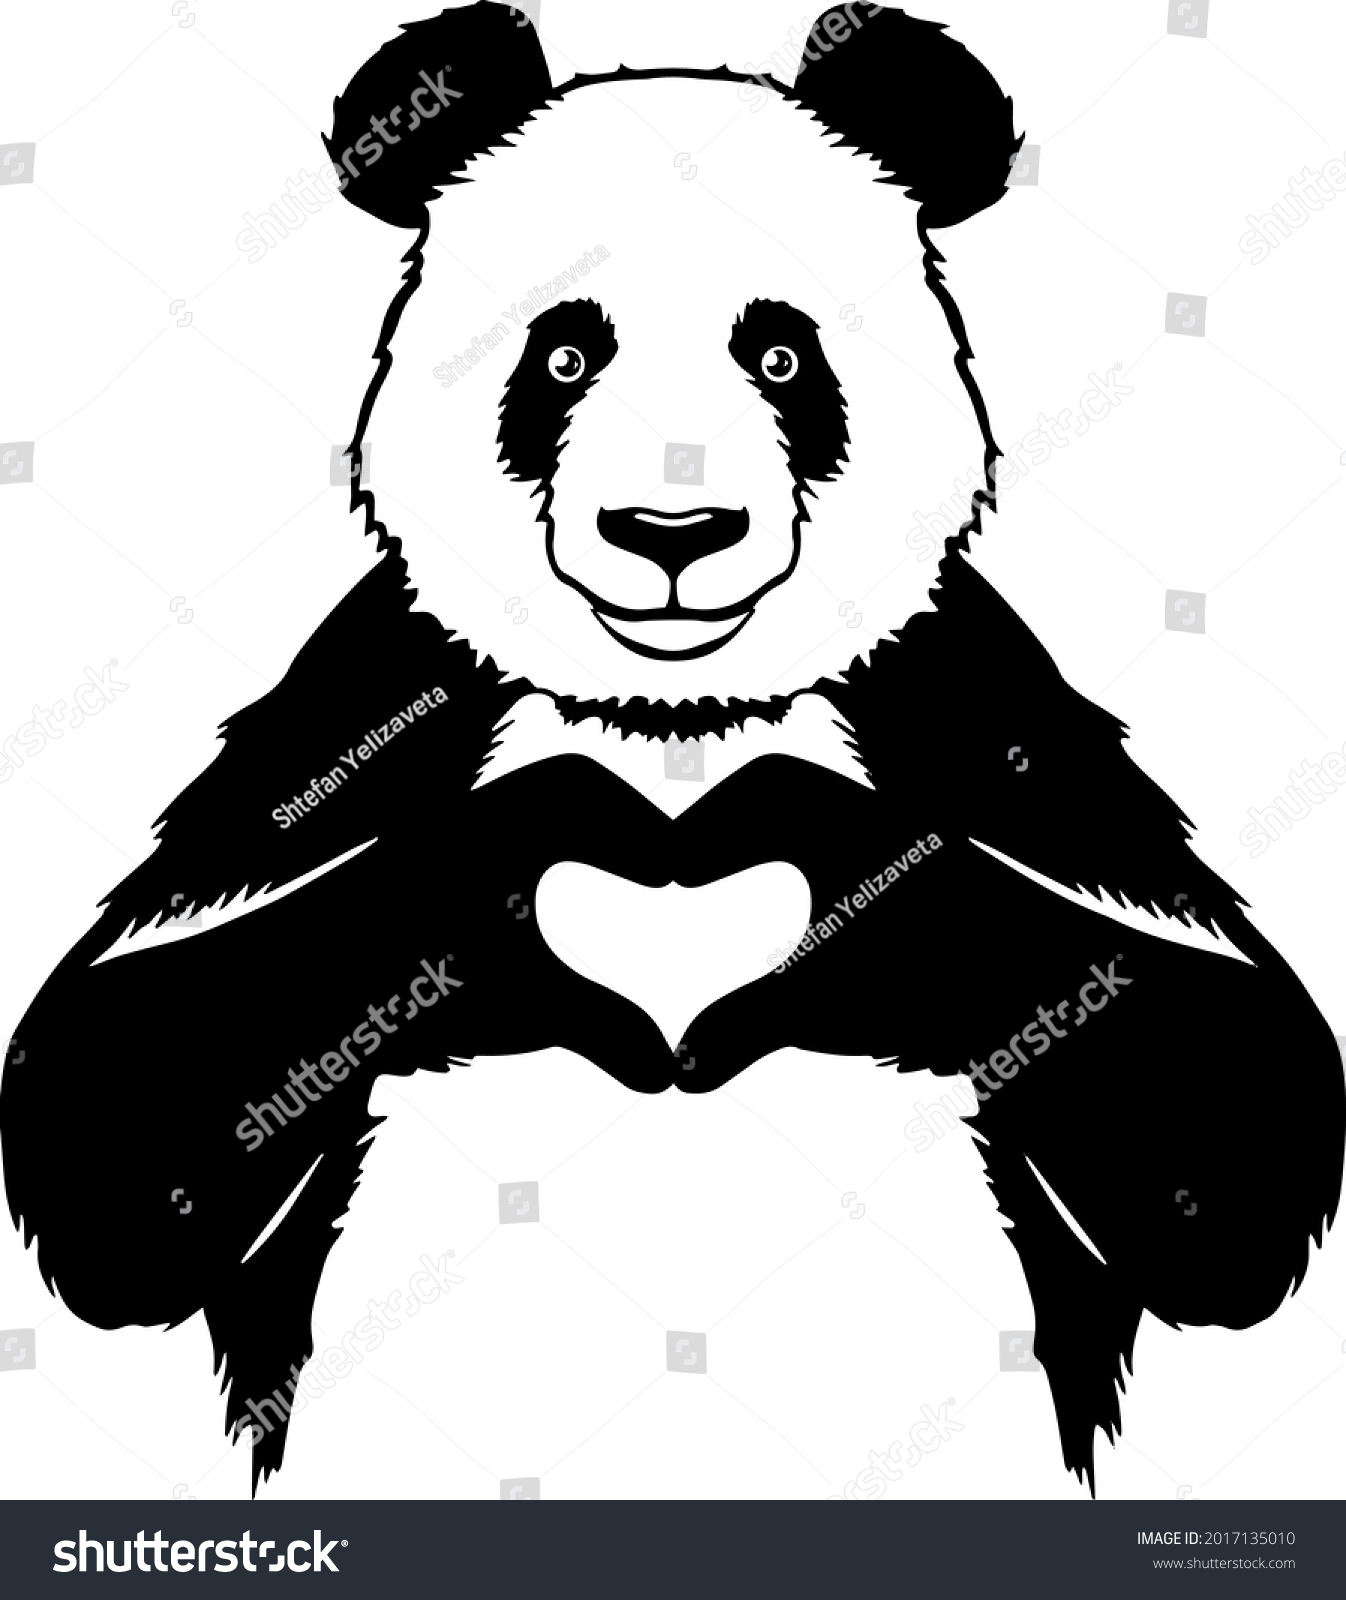 SVG of Panda shows his heart with his hands. Positive panda. T-shirt design .For vinyl cutting and printing svg